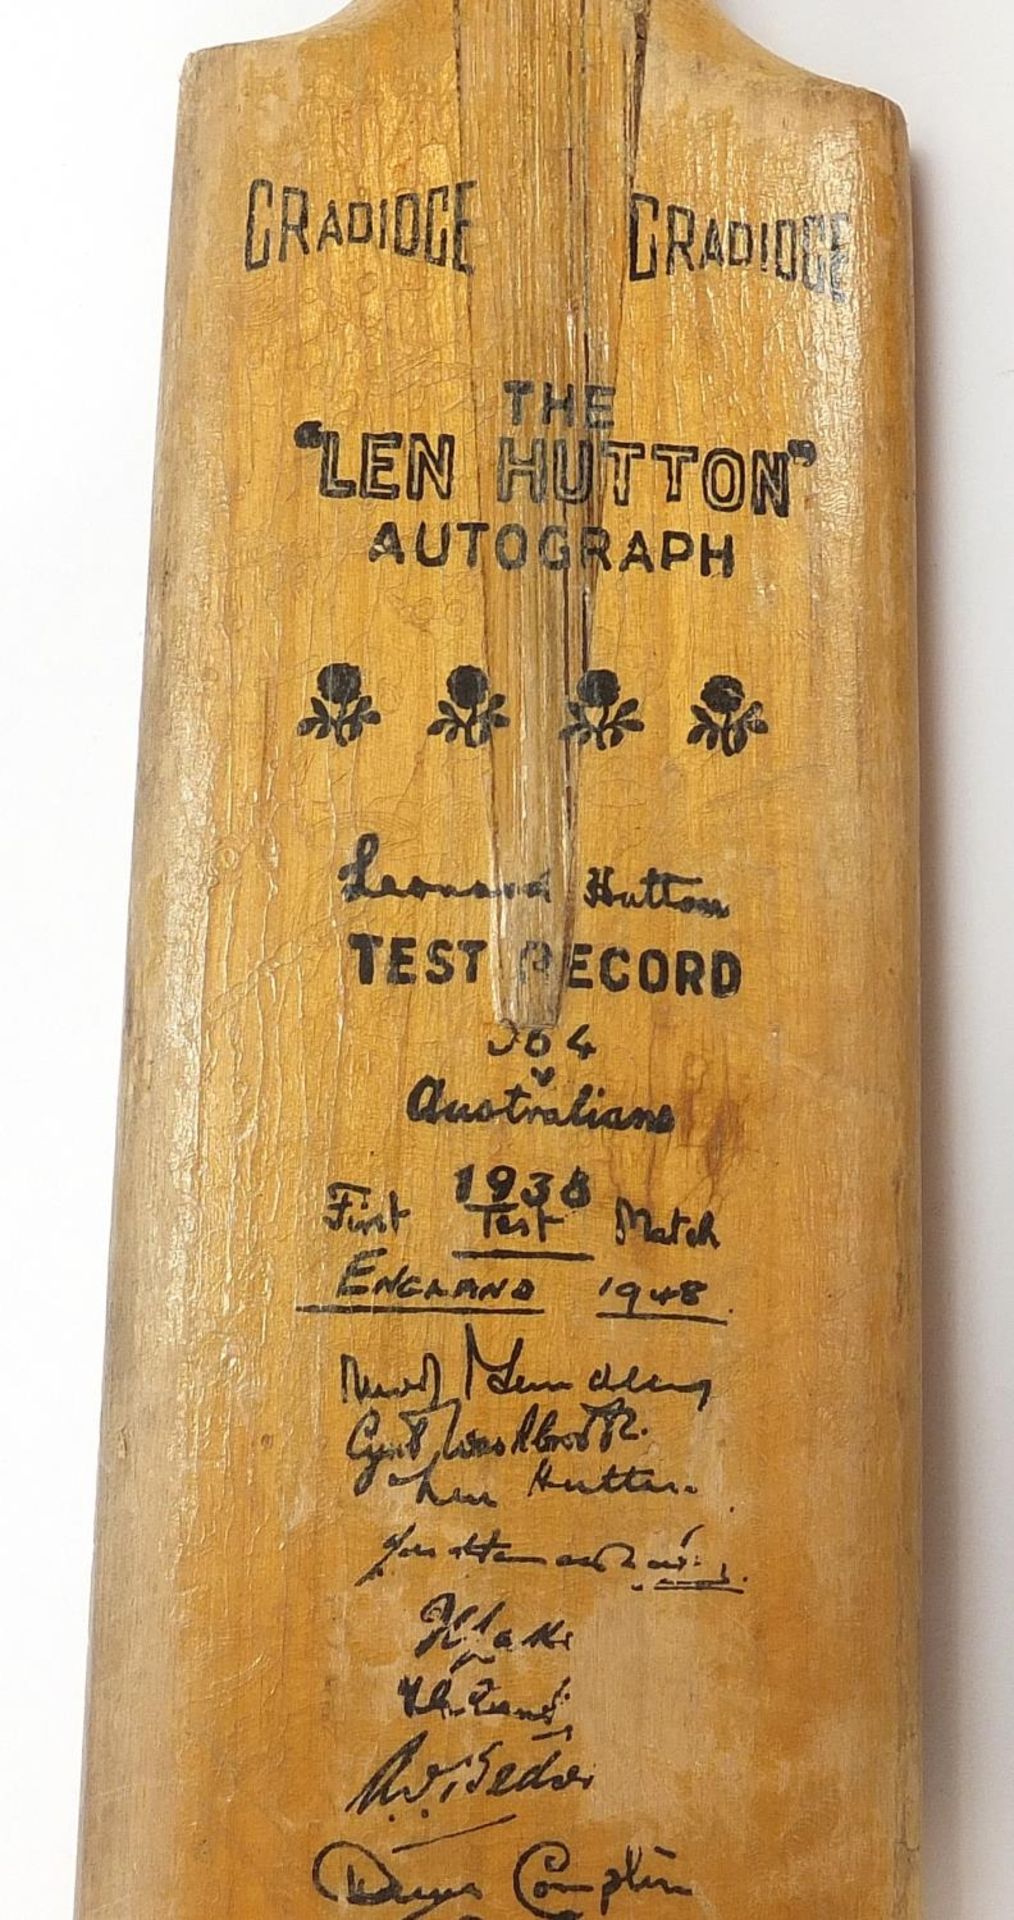 Two miniature autographed cricket bats comprising West Indies Tour 1950-60 and The Len Hutton - Image 2 of 5